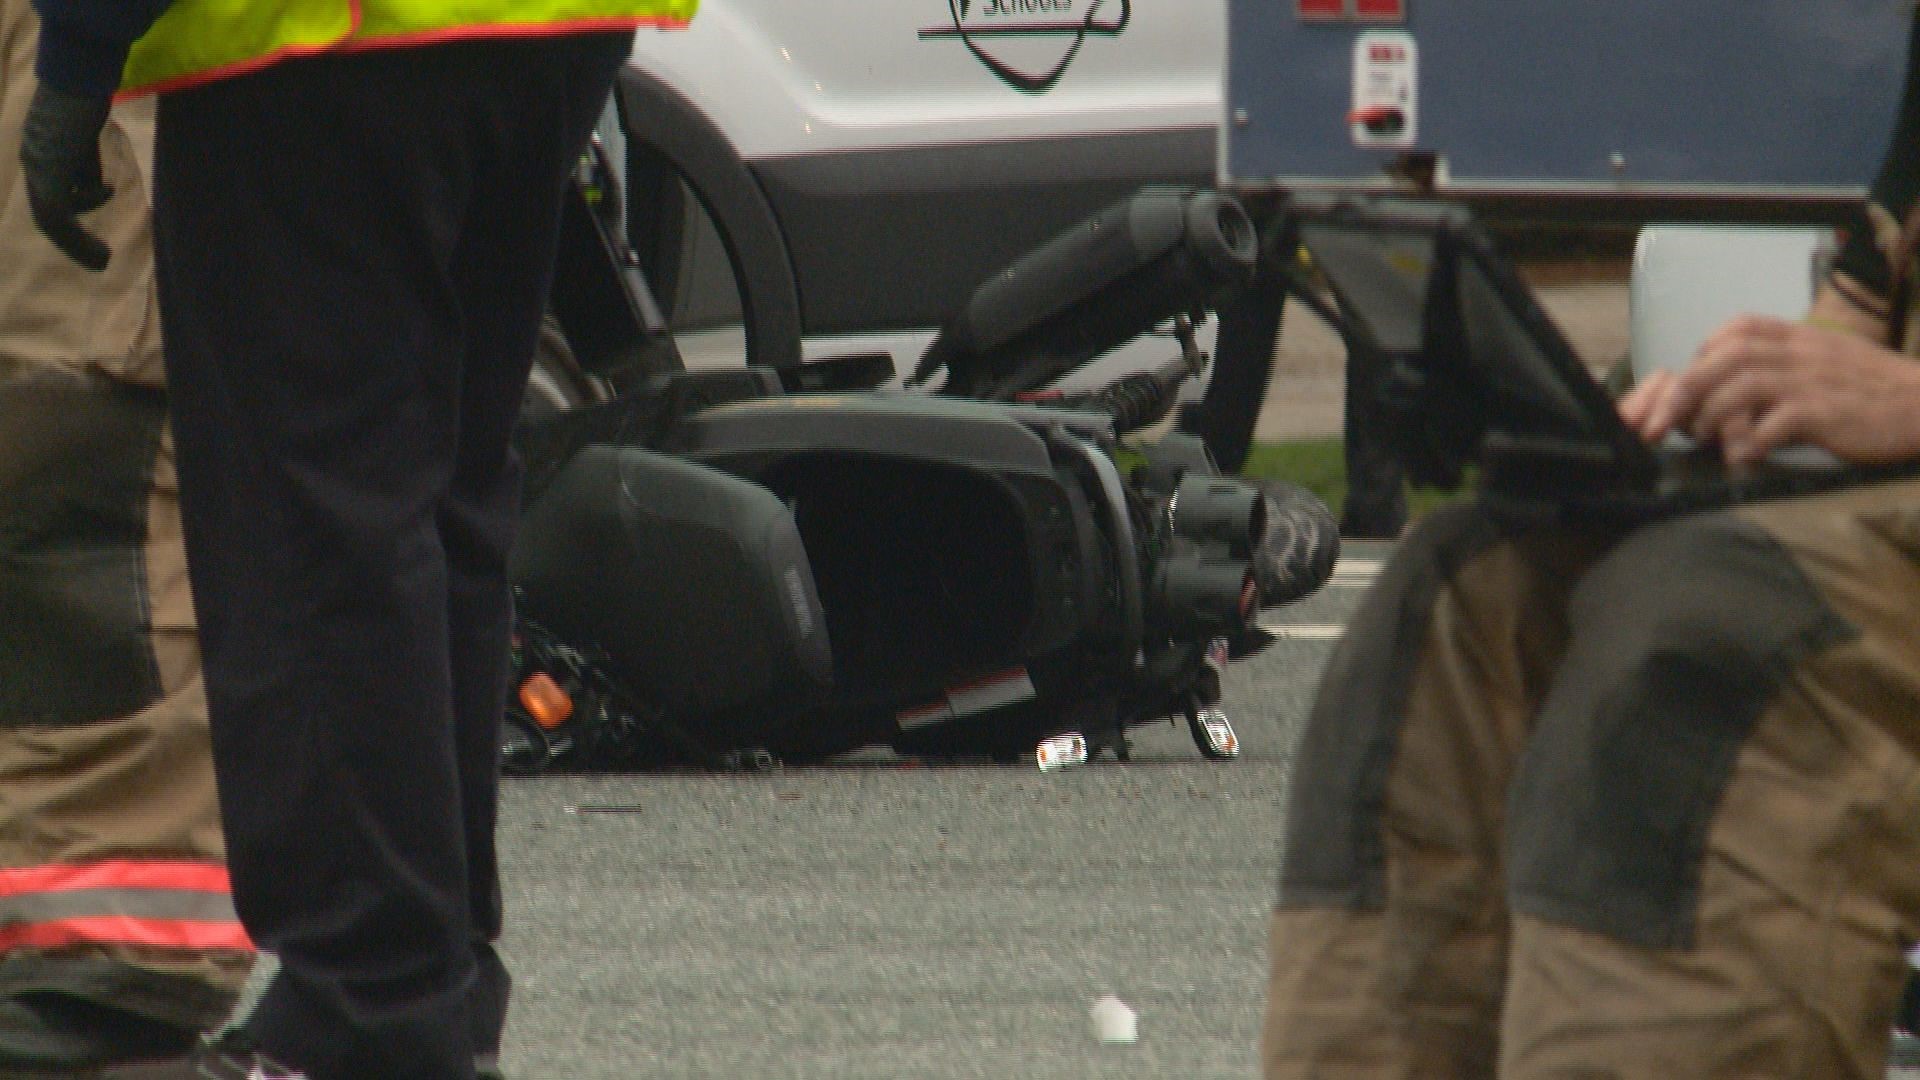 A 57-year-old man is dead after a motorcycle crash involving a tractor-trailer and SUV in Bethesda, Maryland.